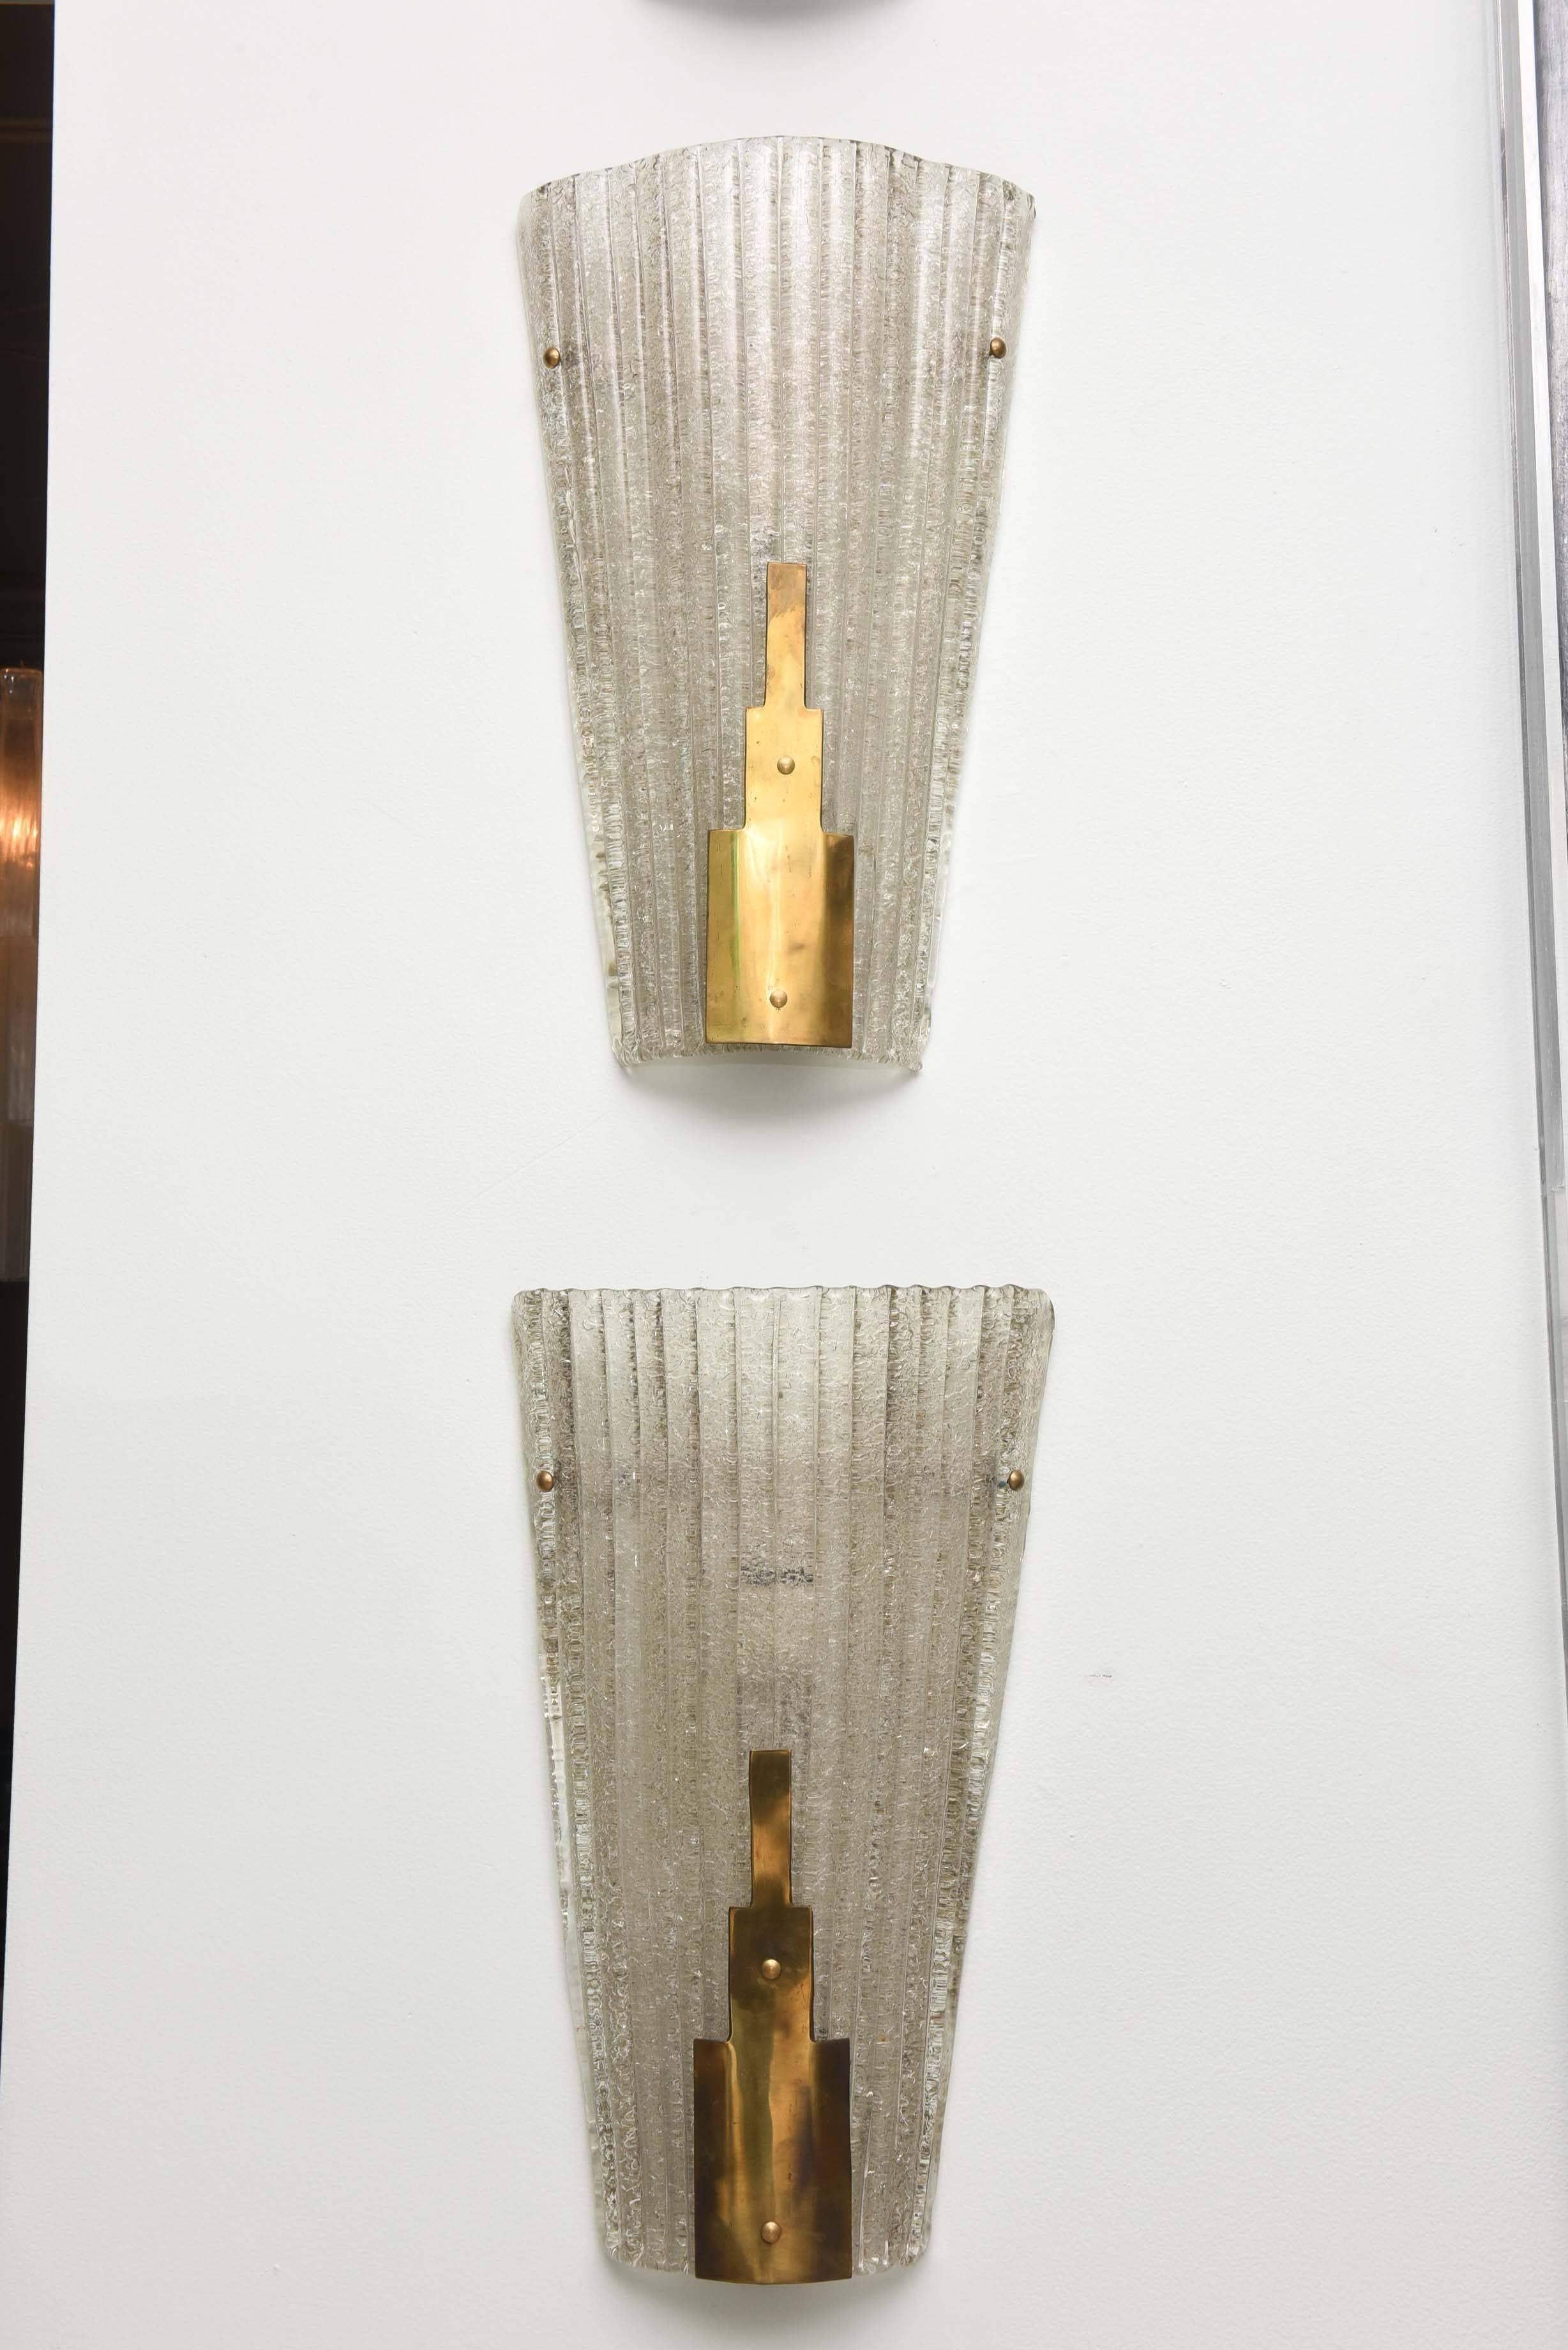 Italian modern wall lights with handblown glass and bronze detailing, impressed mark Barovier e Toso on bronze.